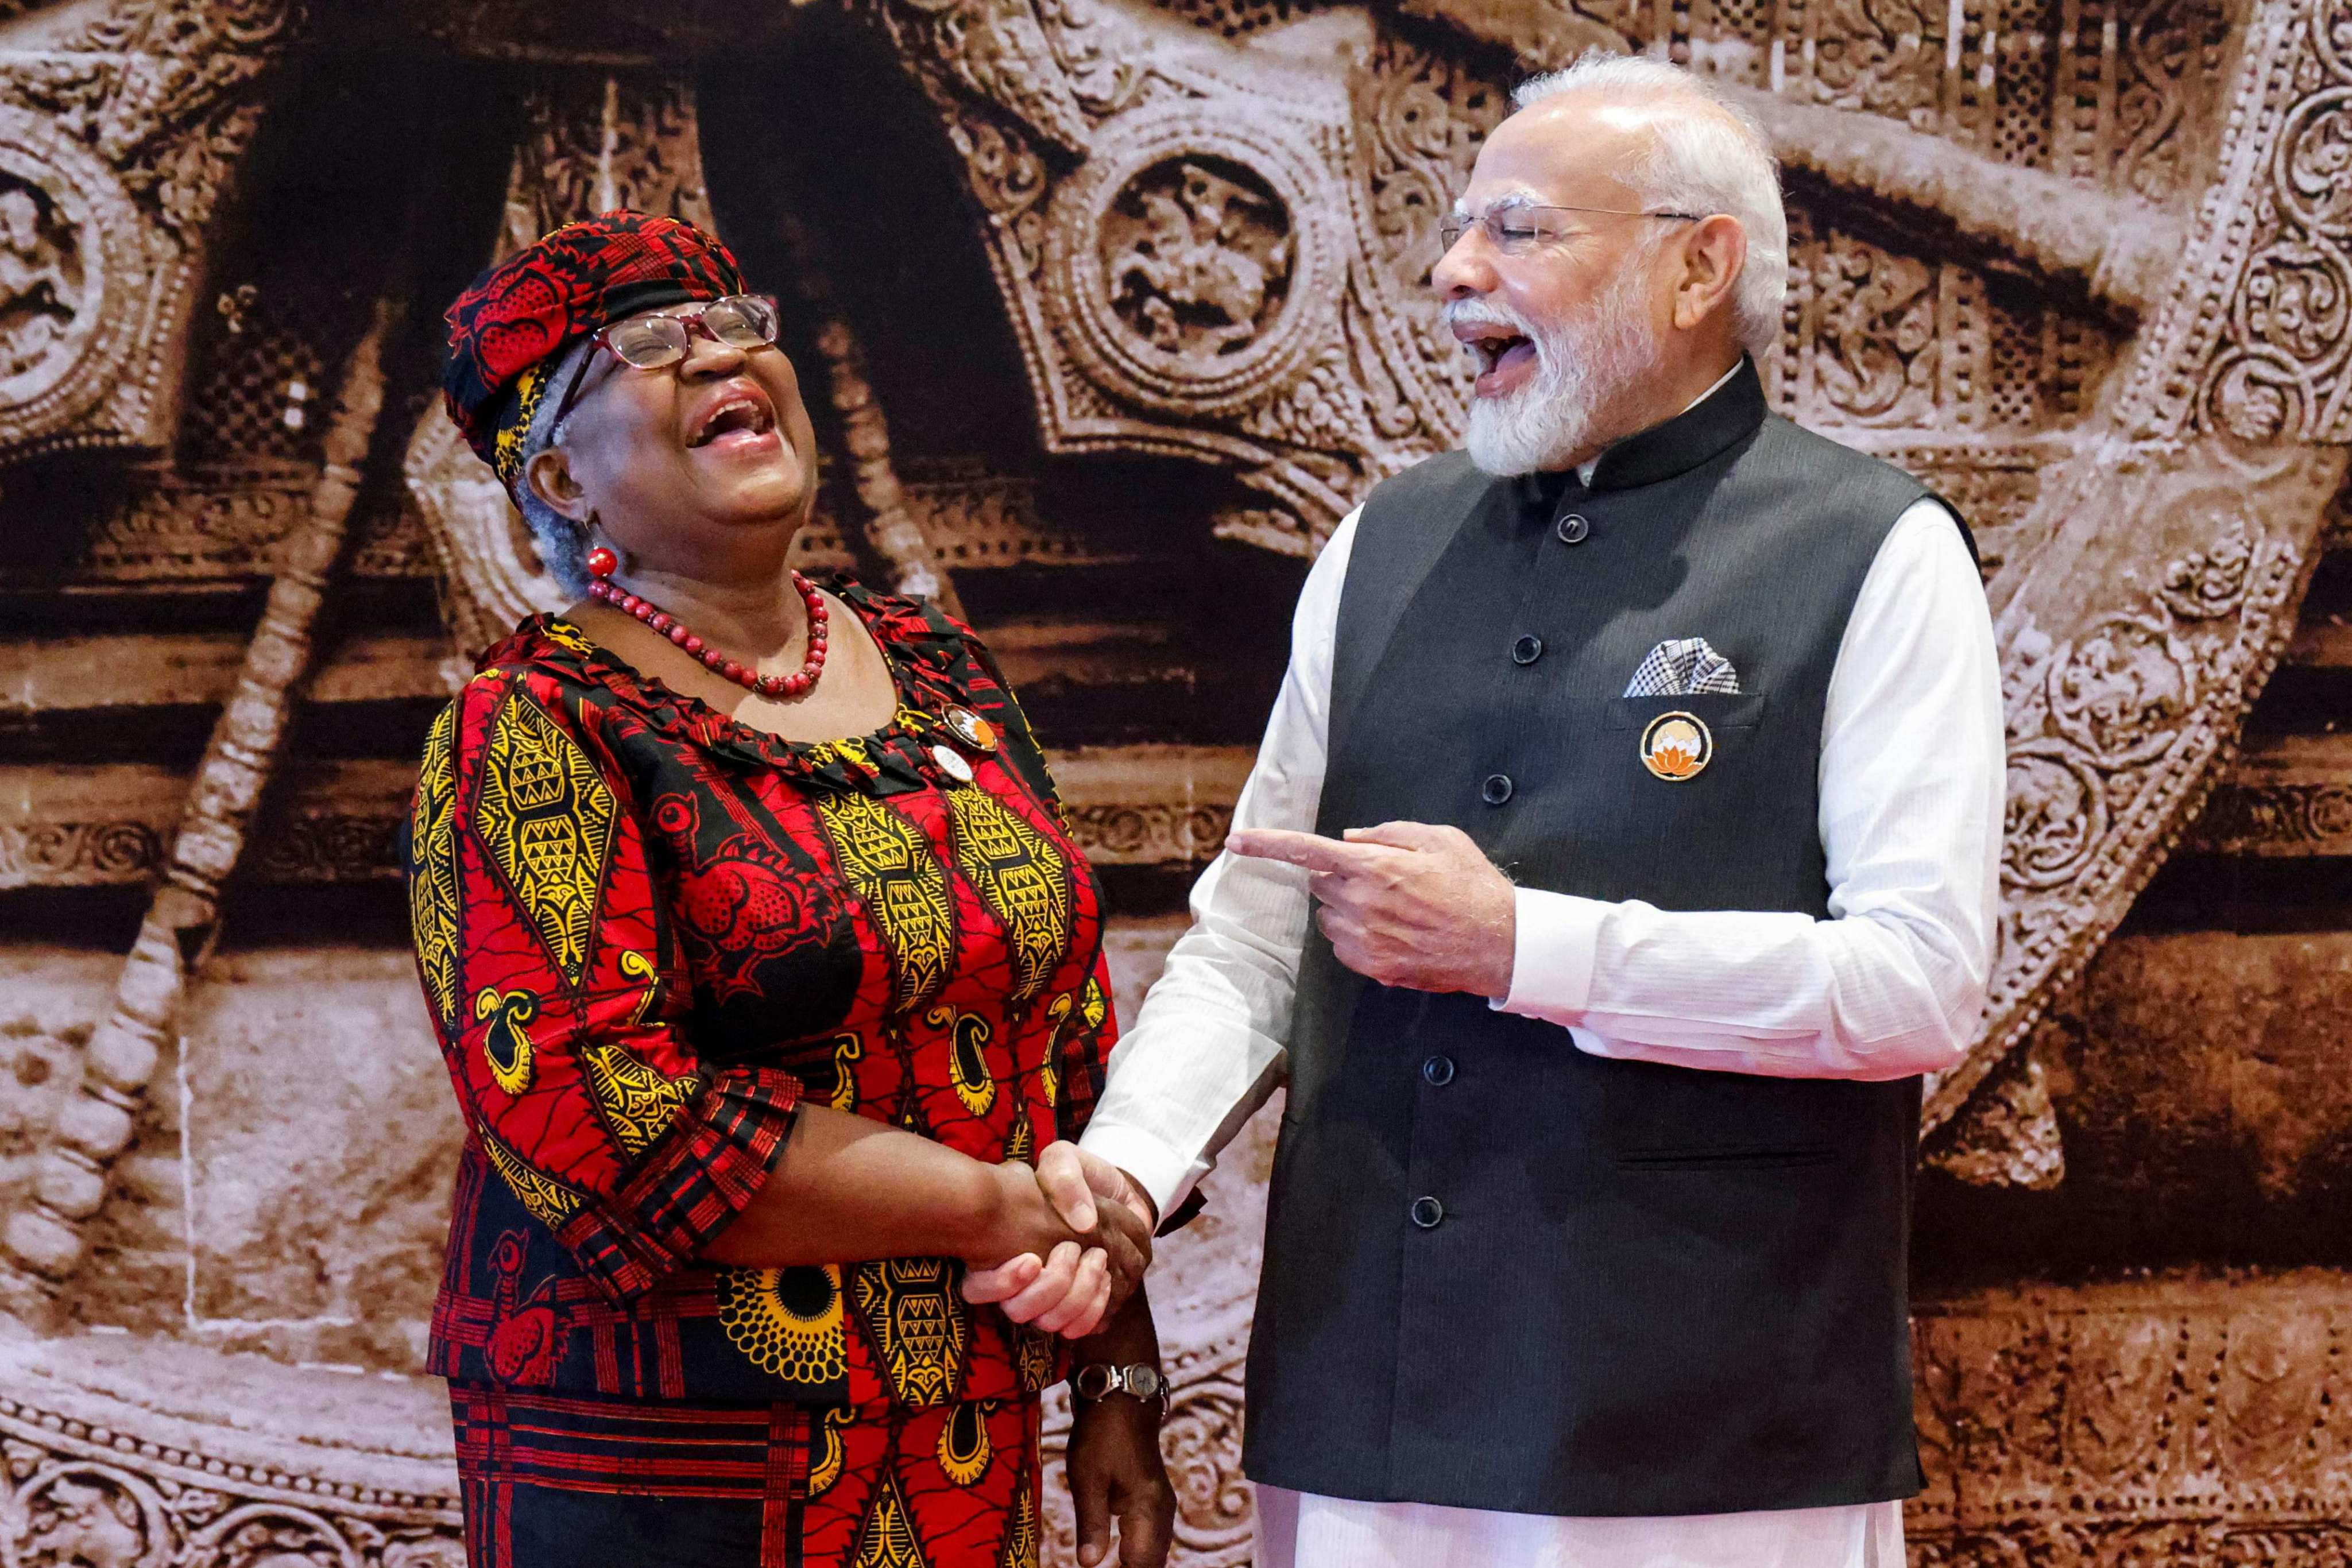 Indian Prime Minister Narendra Modi with WTO director general Ngozi Okonjo-Iweala ahead of the G20 Summit in New Delhi on September 9 last year. The state of the WTO reflects the lack of global cooperation and compromise. Photo: AFP